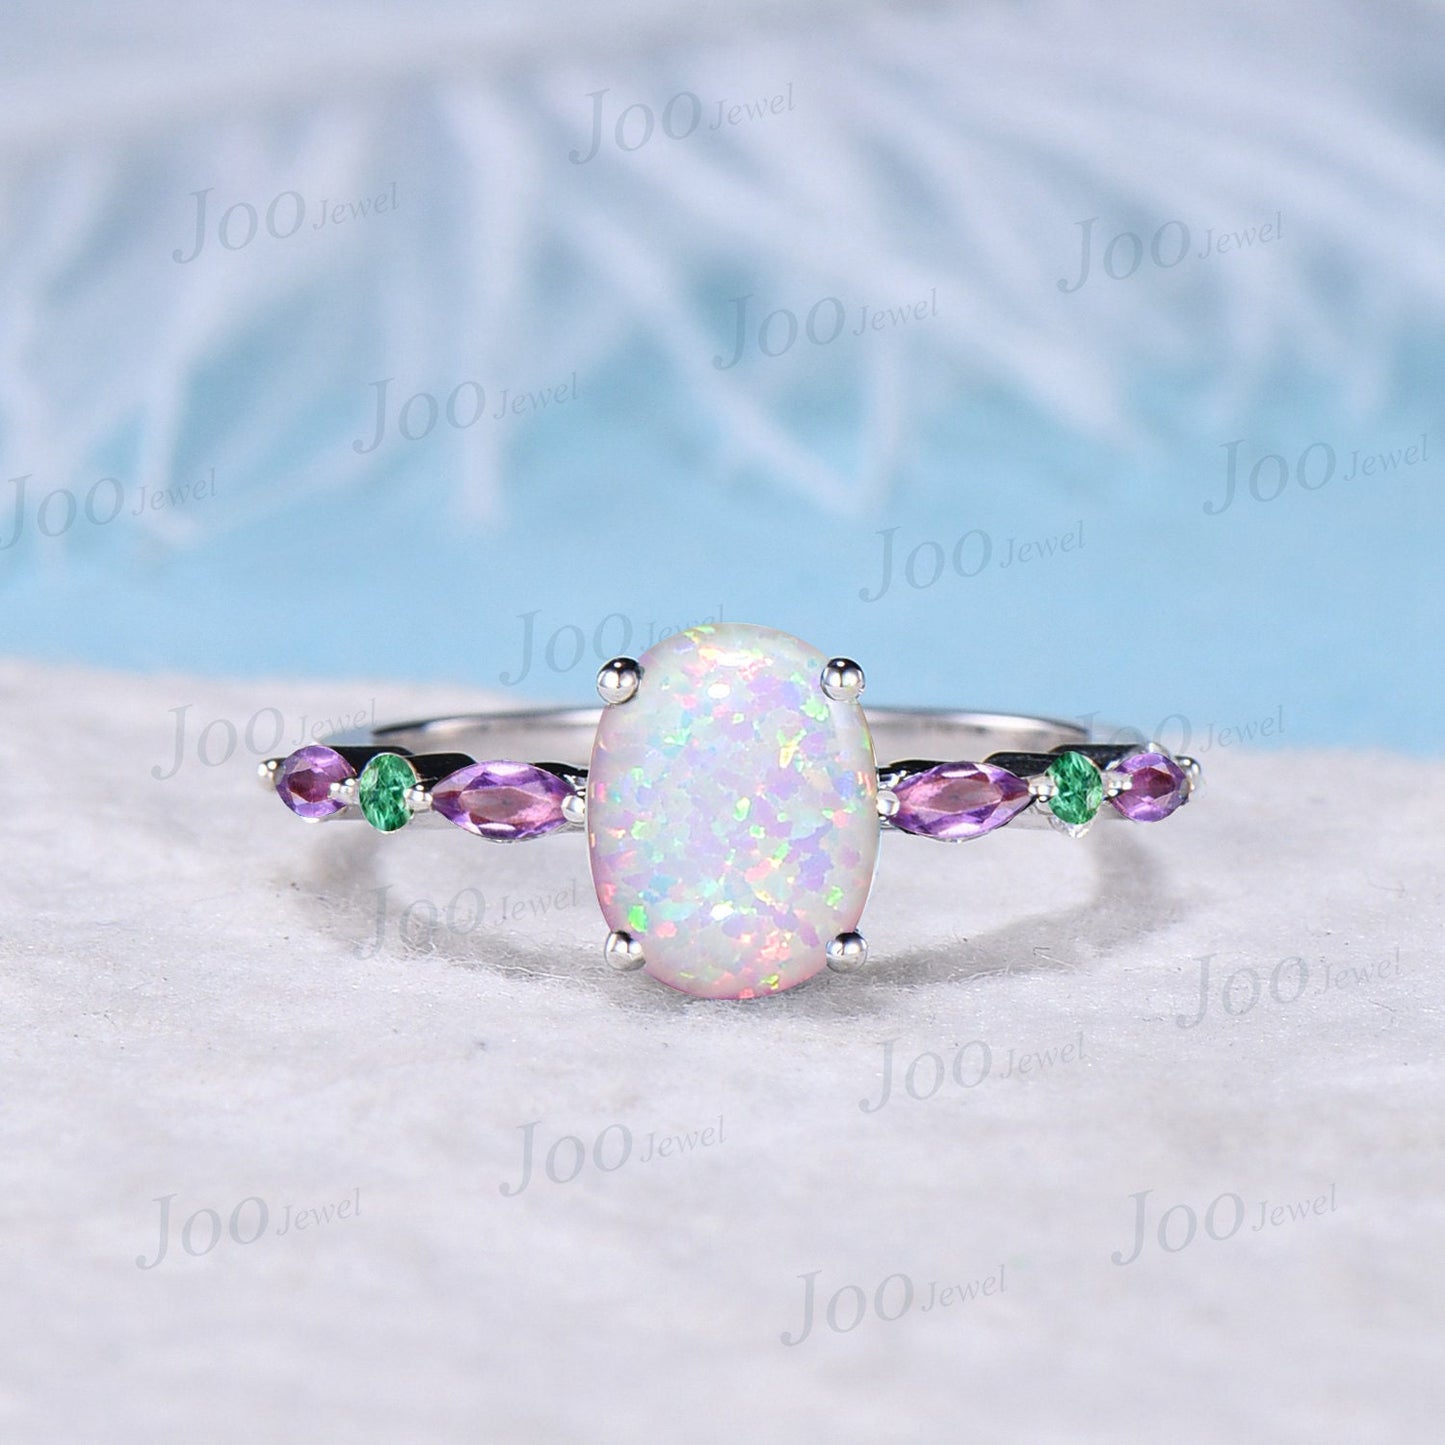 2ct Oval White Opal Engagement Ring Half Eternity Band Opal and Emerald Amethyst Wedding Ring Unique Anniversary Birthday Gift Platinum Ring